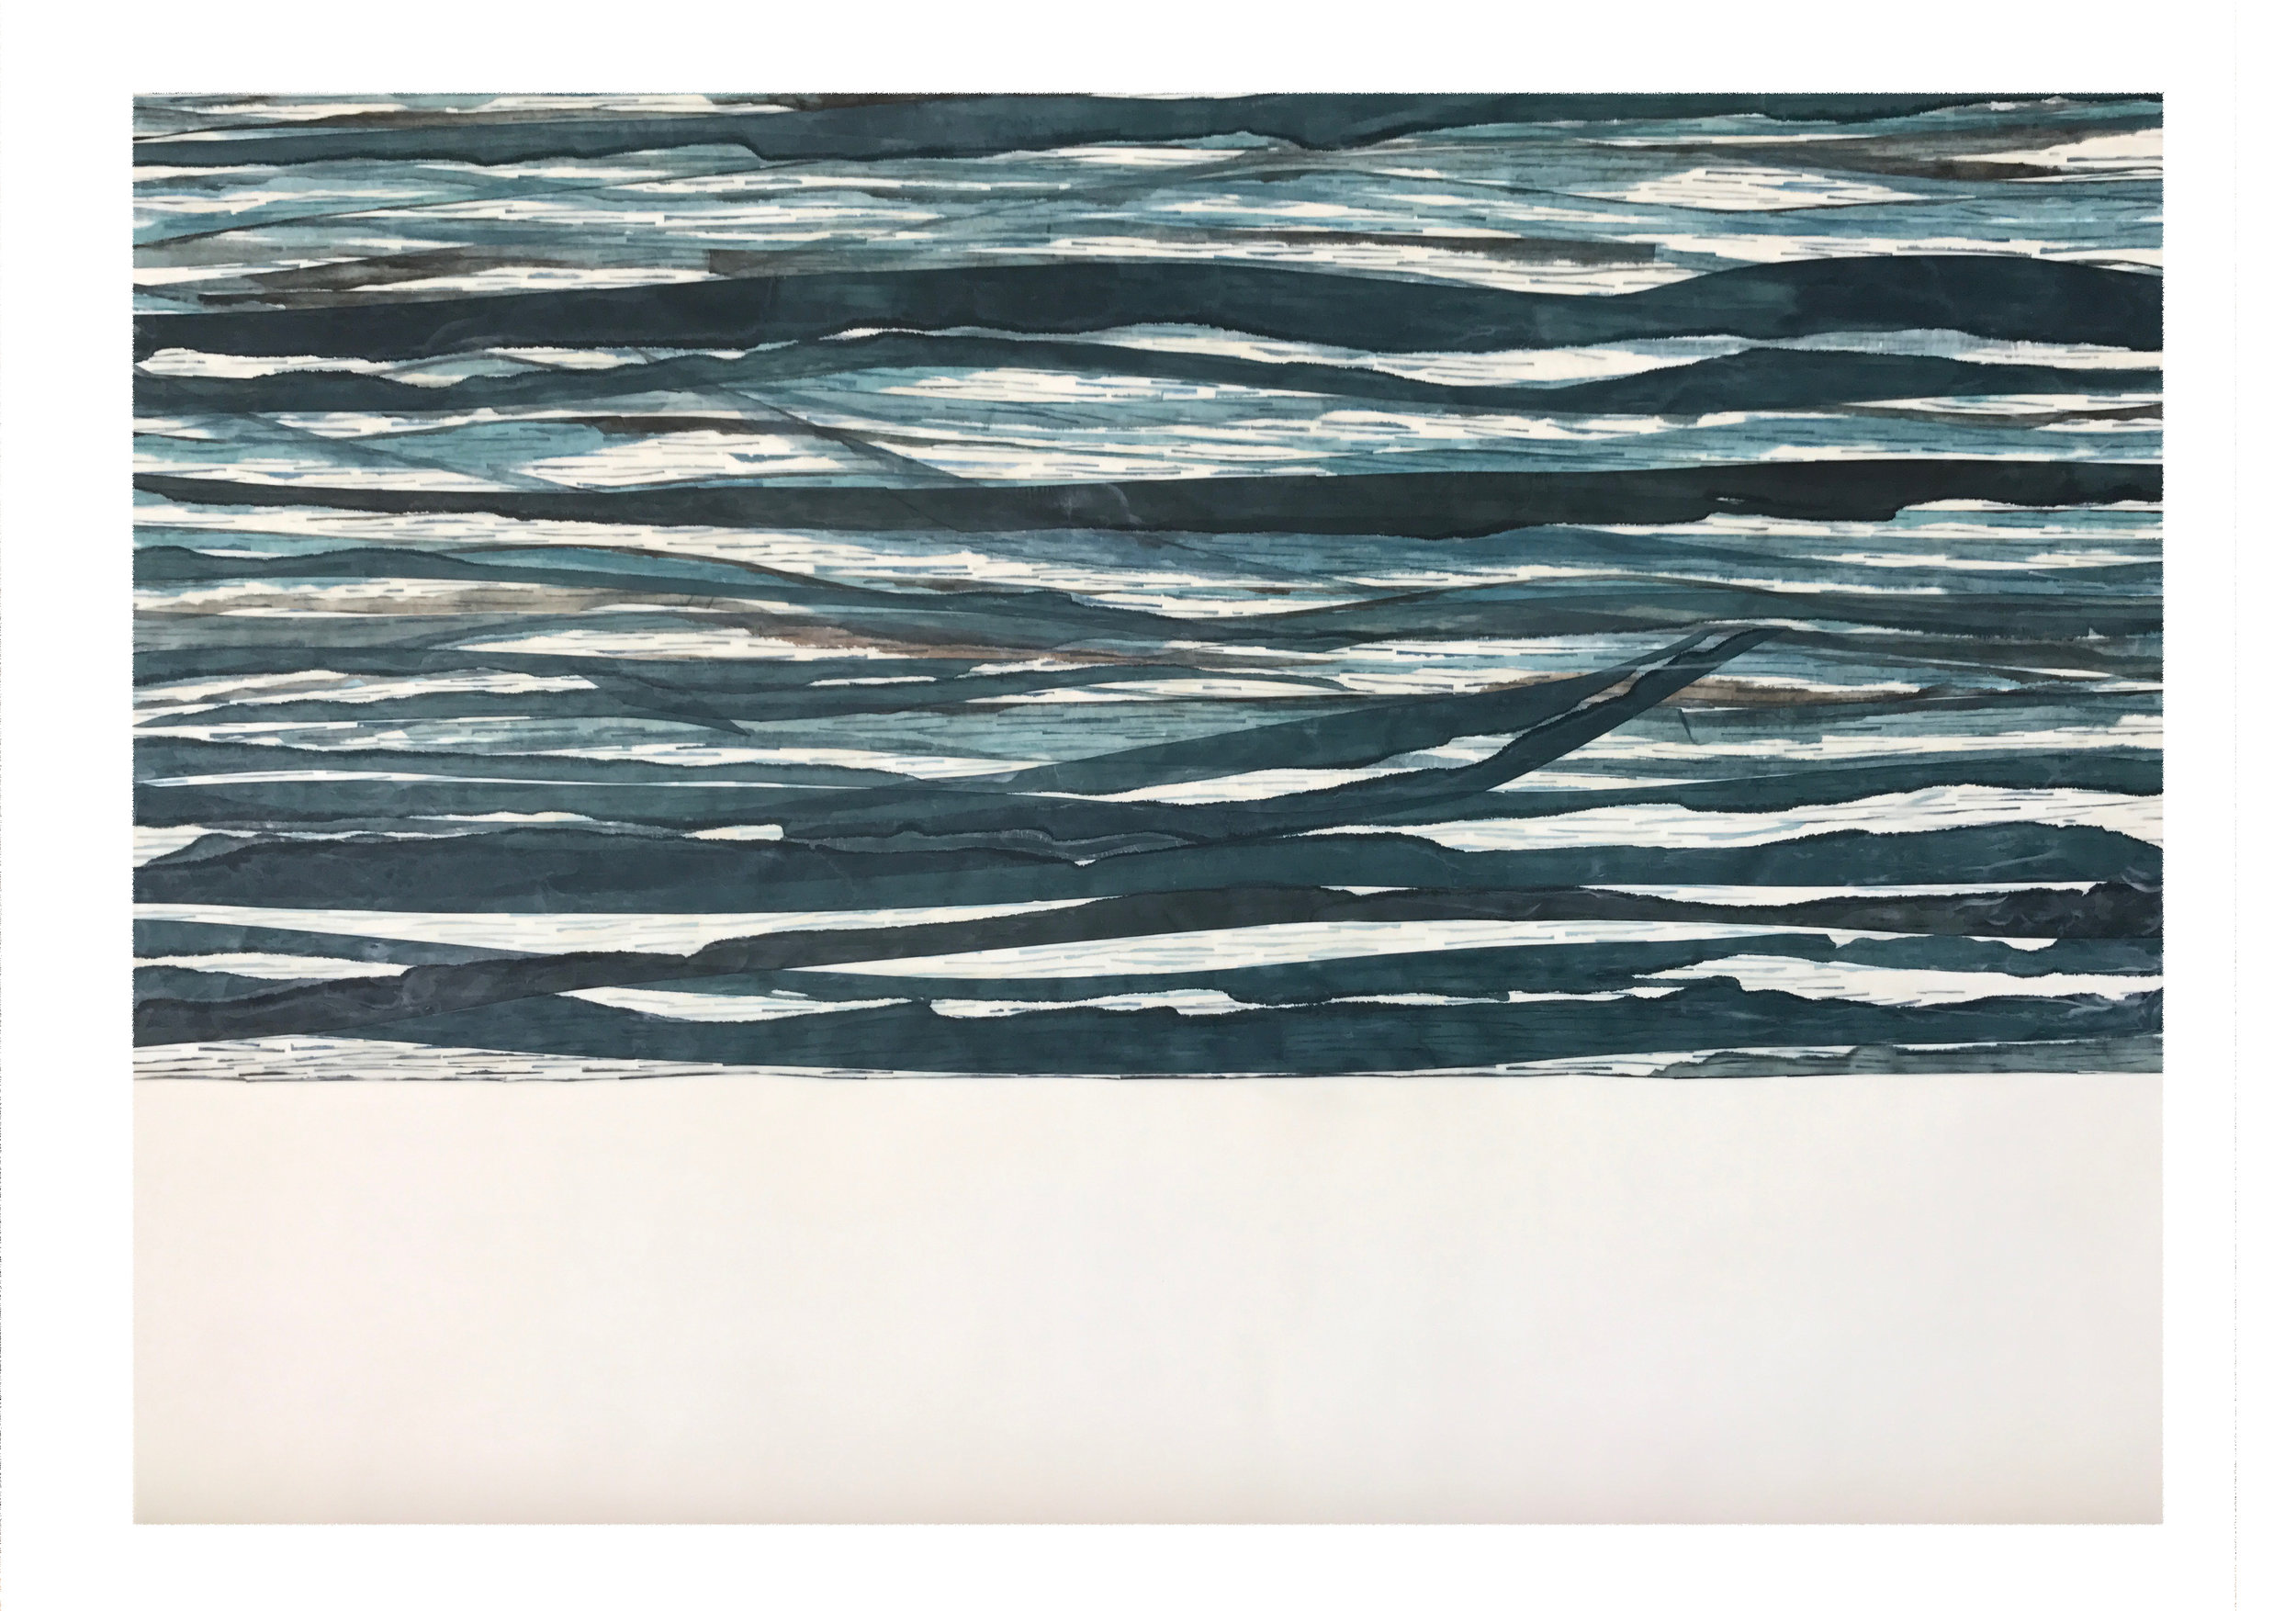  Swell 2, 2017 (sold) Encaustic, Mulberry paper, watercolor 30 x 40&nbsp;x 1.5 inches  The ocean is never far from my mind and is a constant source of inspiration. I often attempt to capture the ever-changing luminosity and movement of the ocean’s su